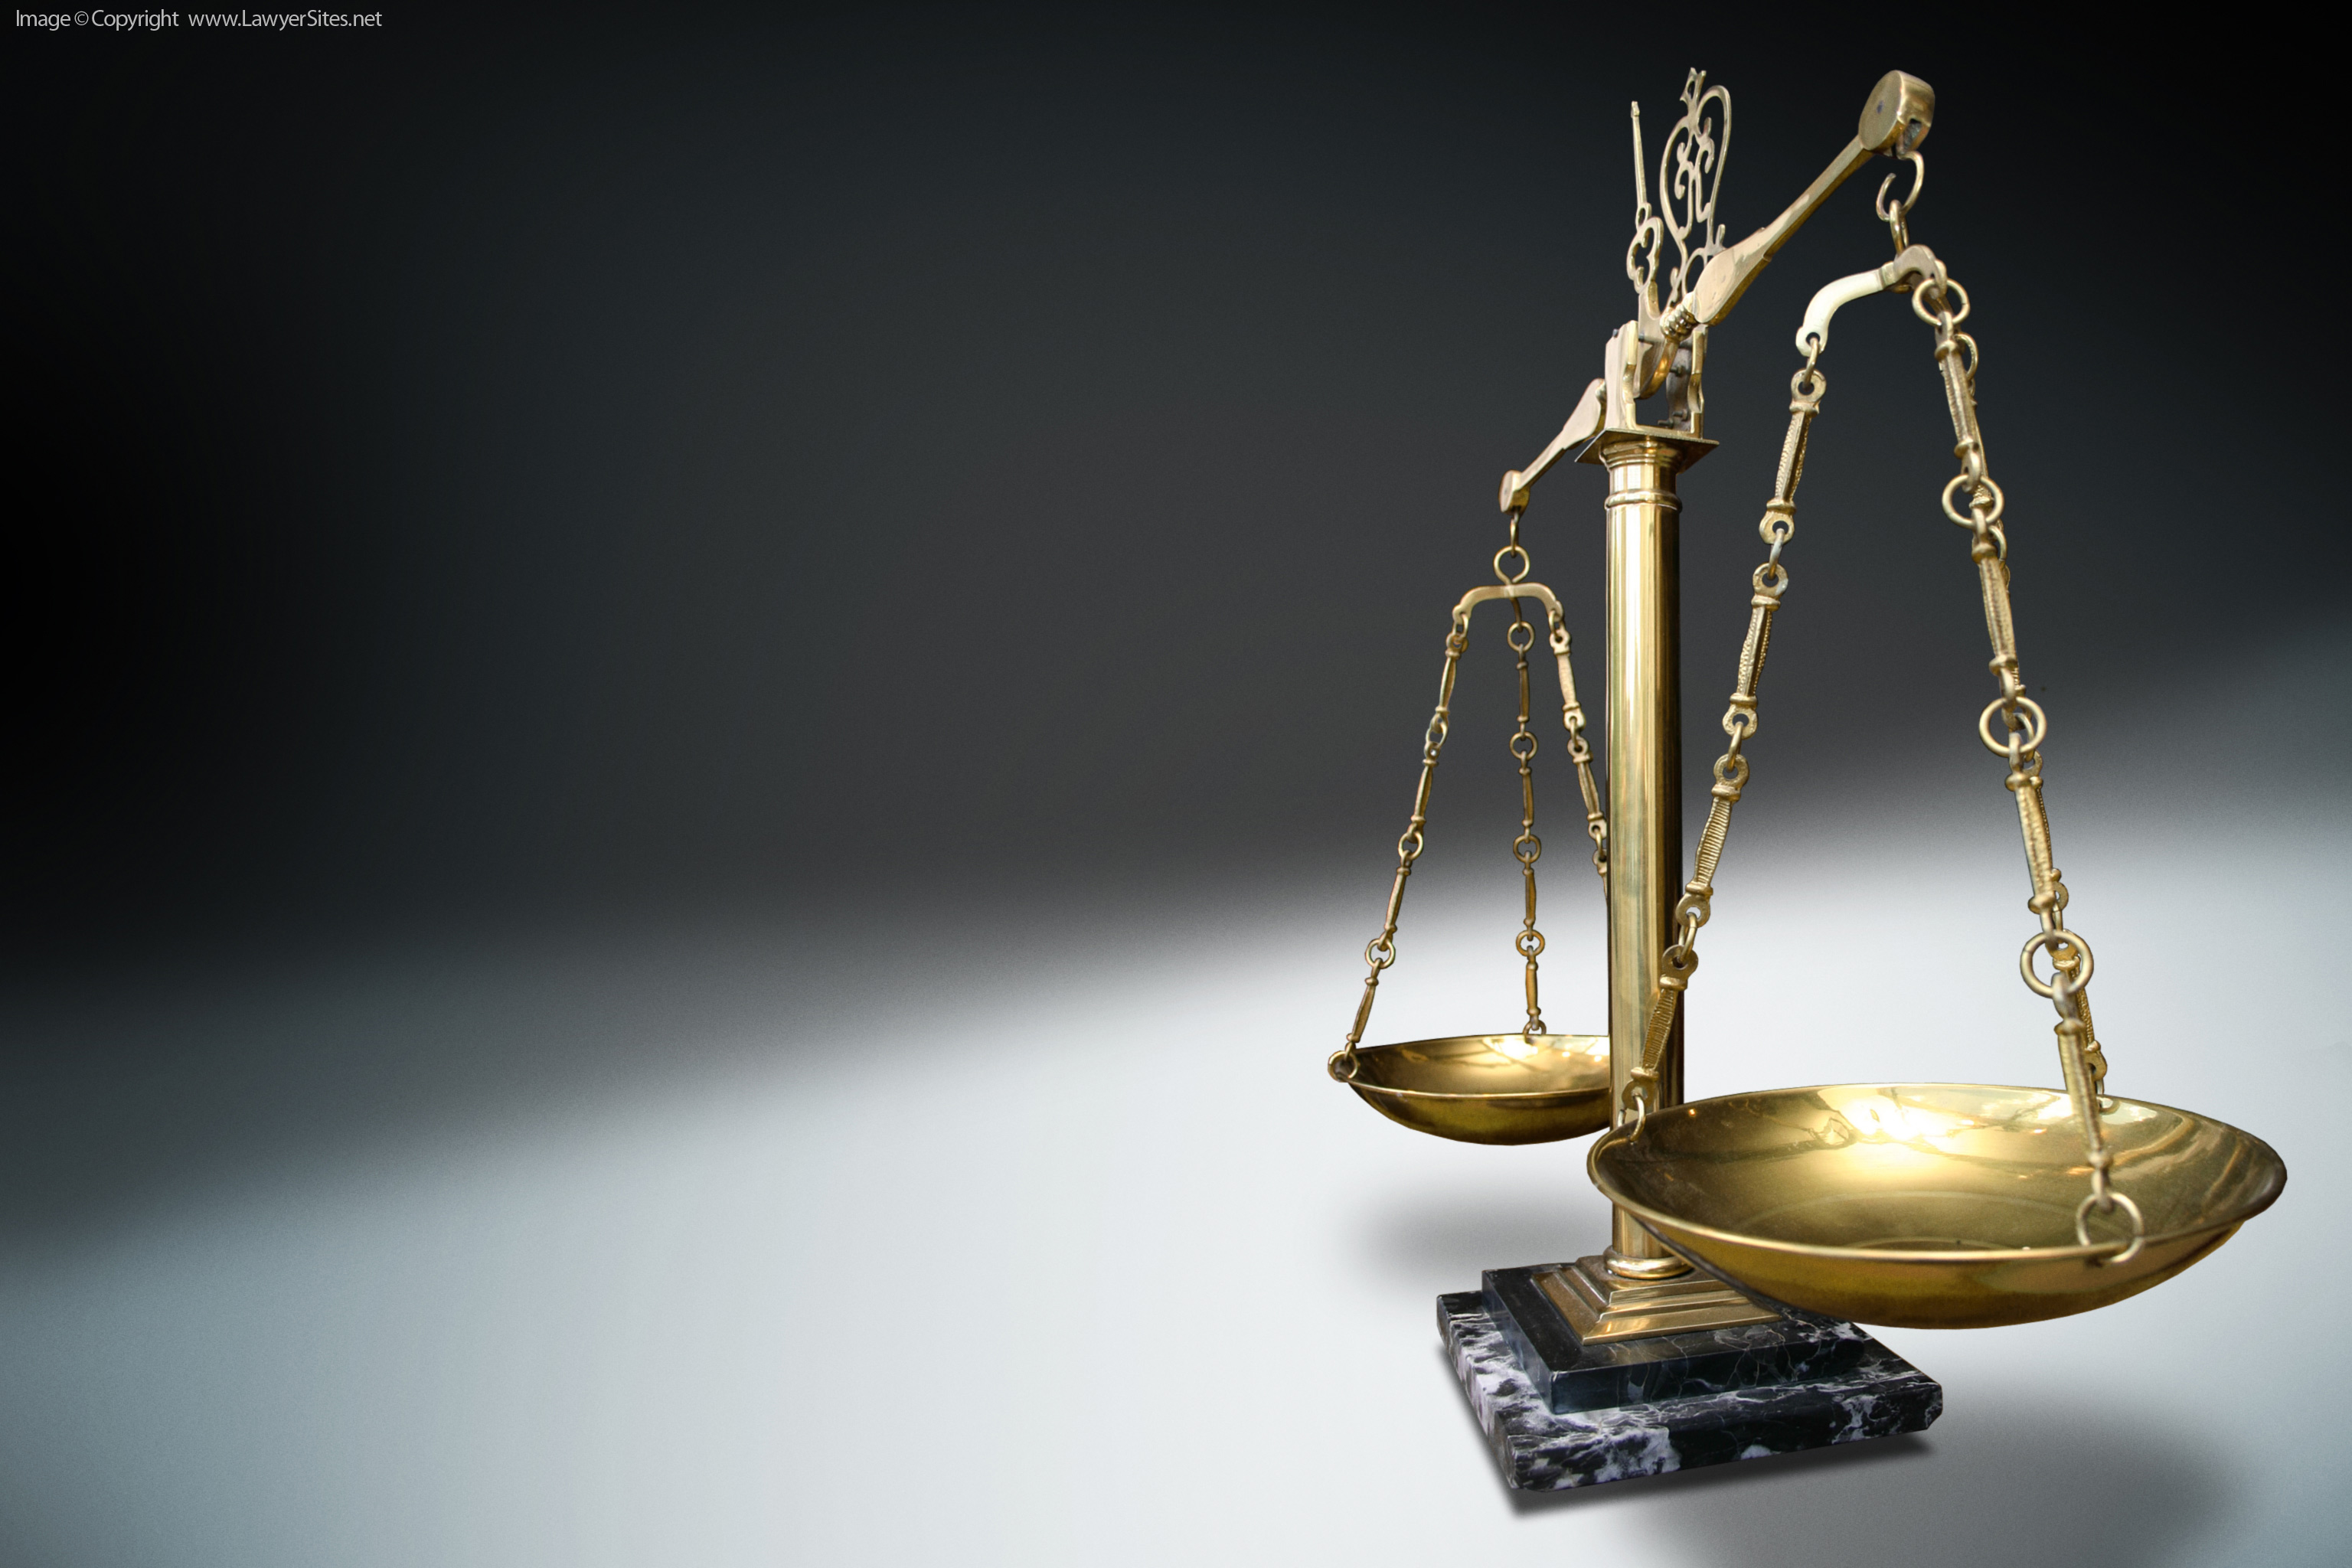 scales-of-justice-stock-photo.jpg